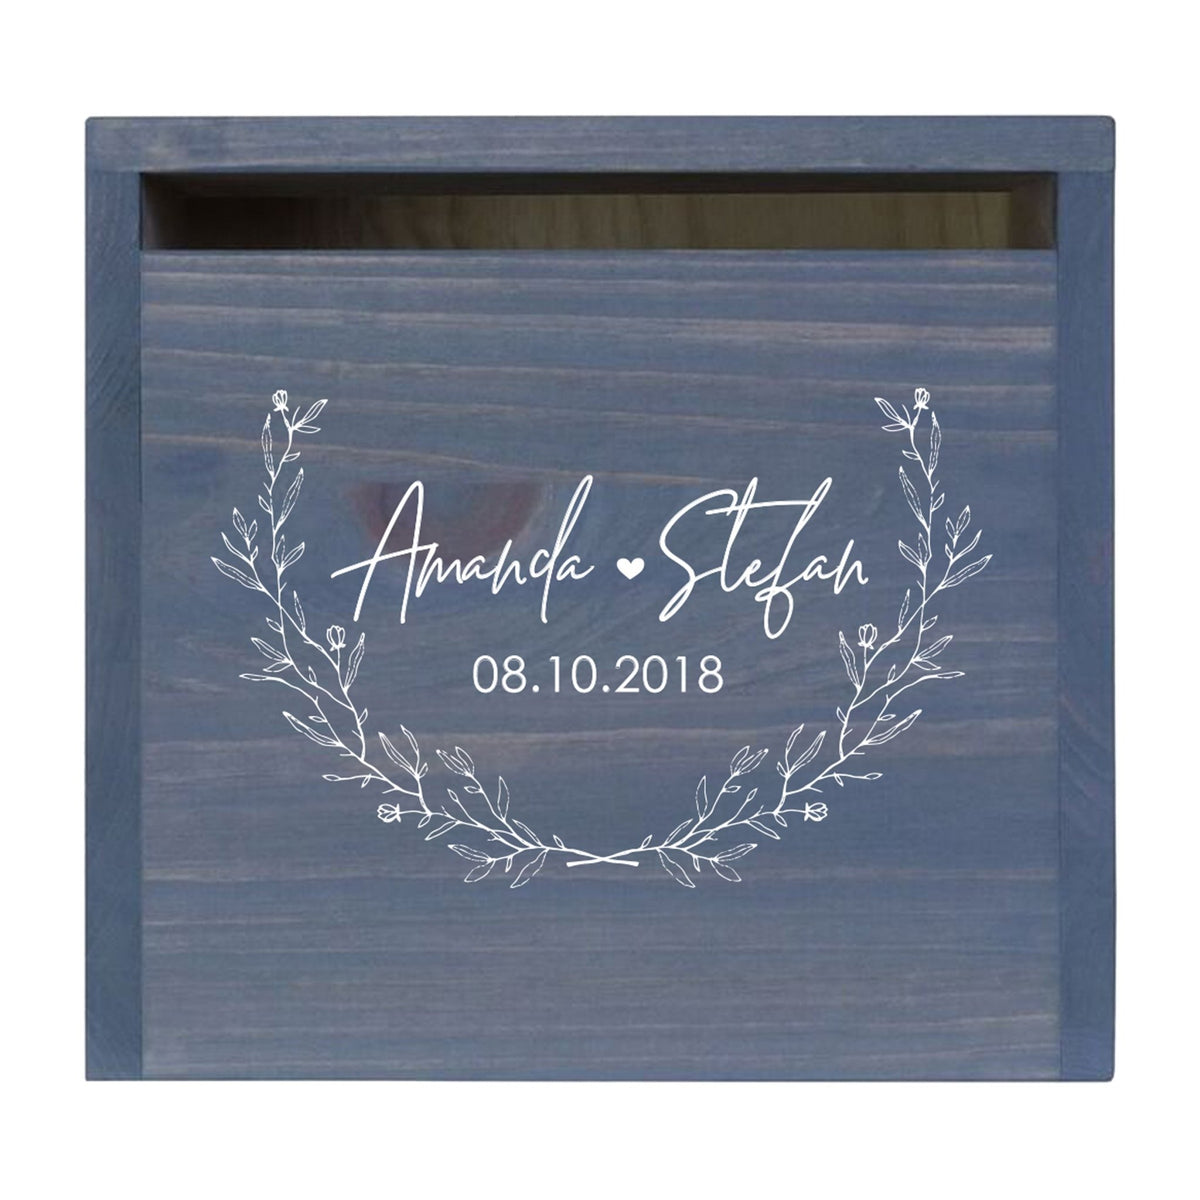 Personalized Wooden Card Box for Wedding Ceremonies, Venues, Receptions, Bridal Showers, and Engagement Parties 13.5x12 - Amanda &amp; Stefan (Leaves) - LifeSong Milestones